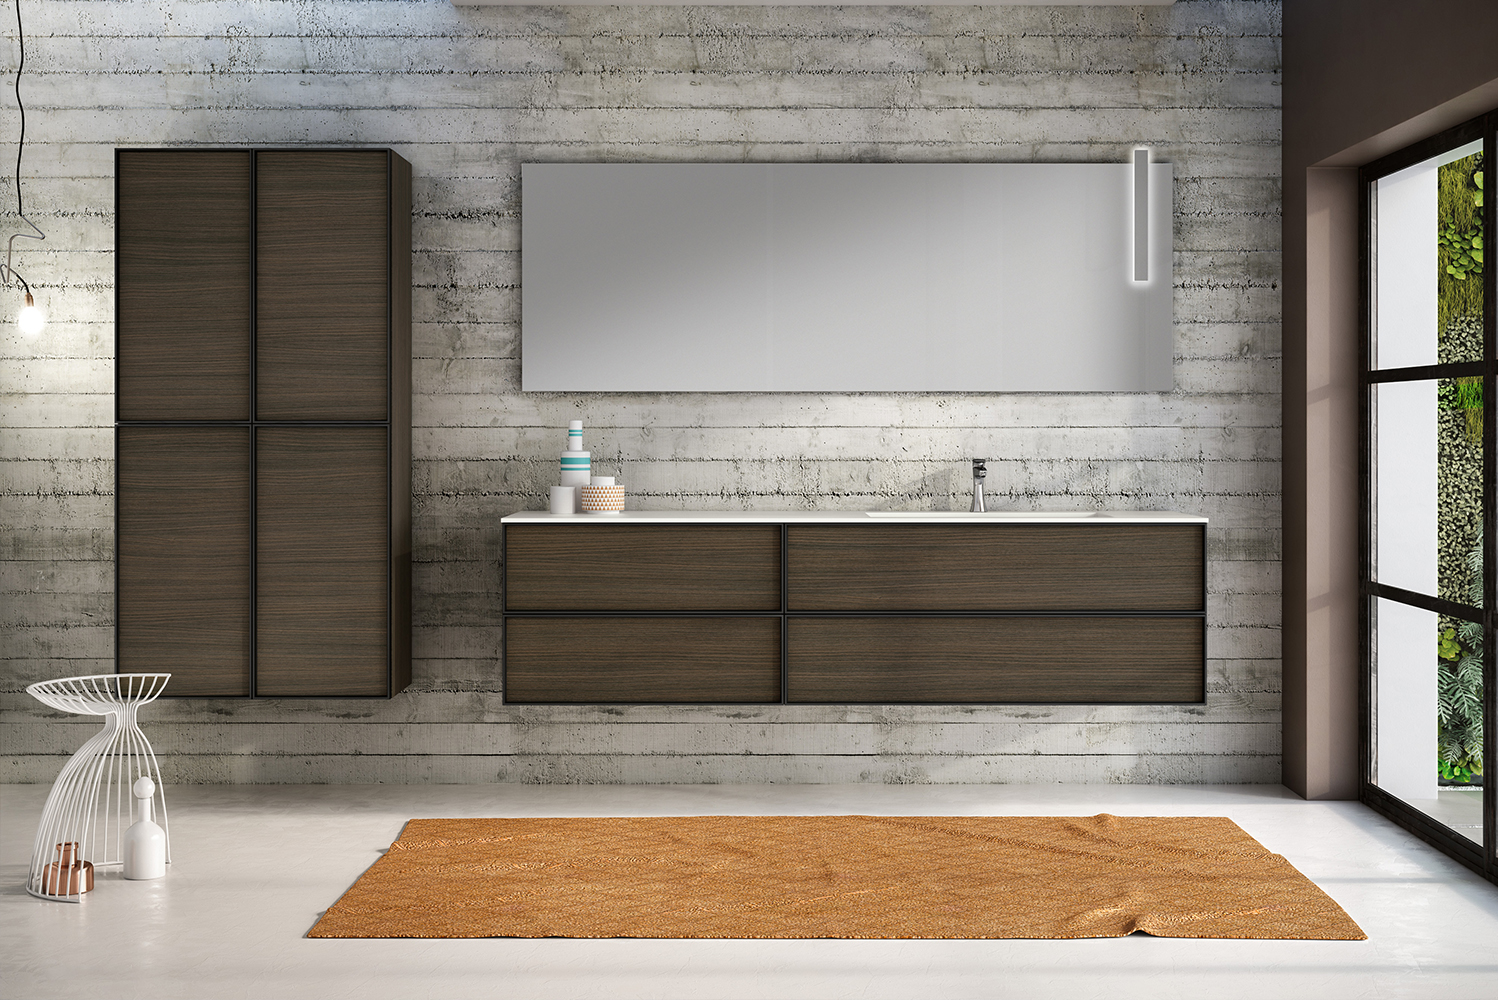 Hastings Tile  Bath launched a new modular vanity collection Class The 